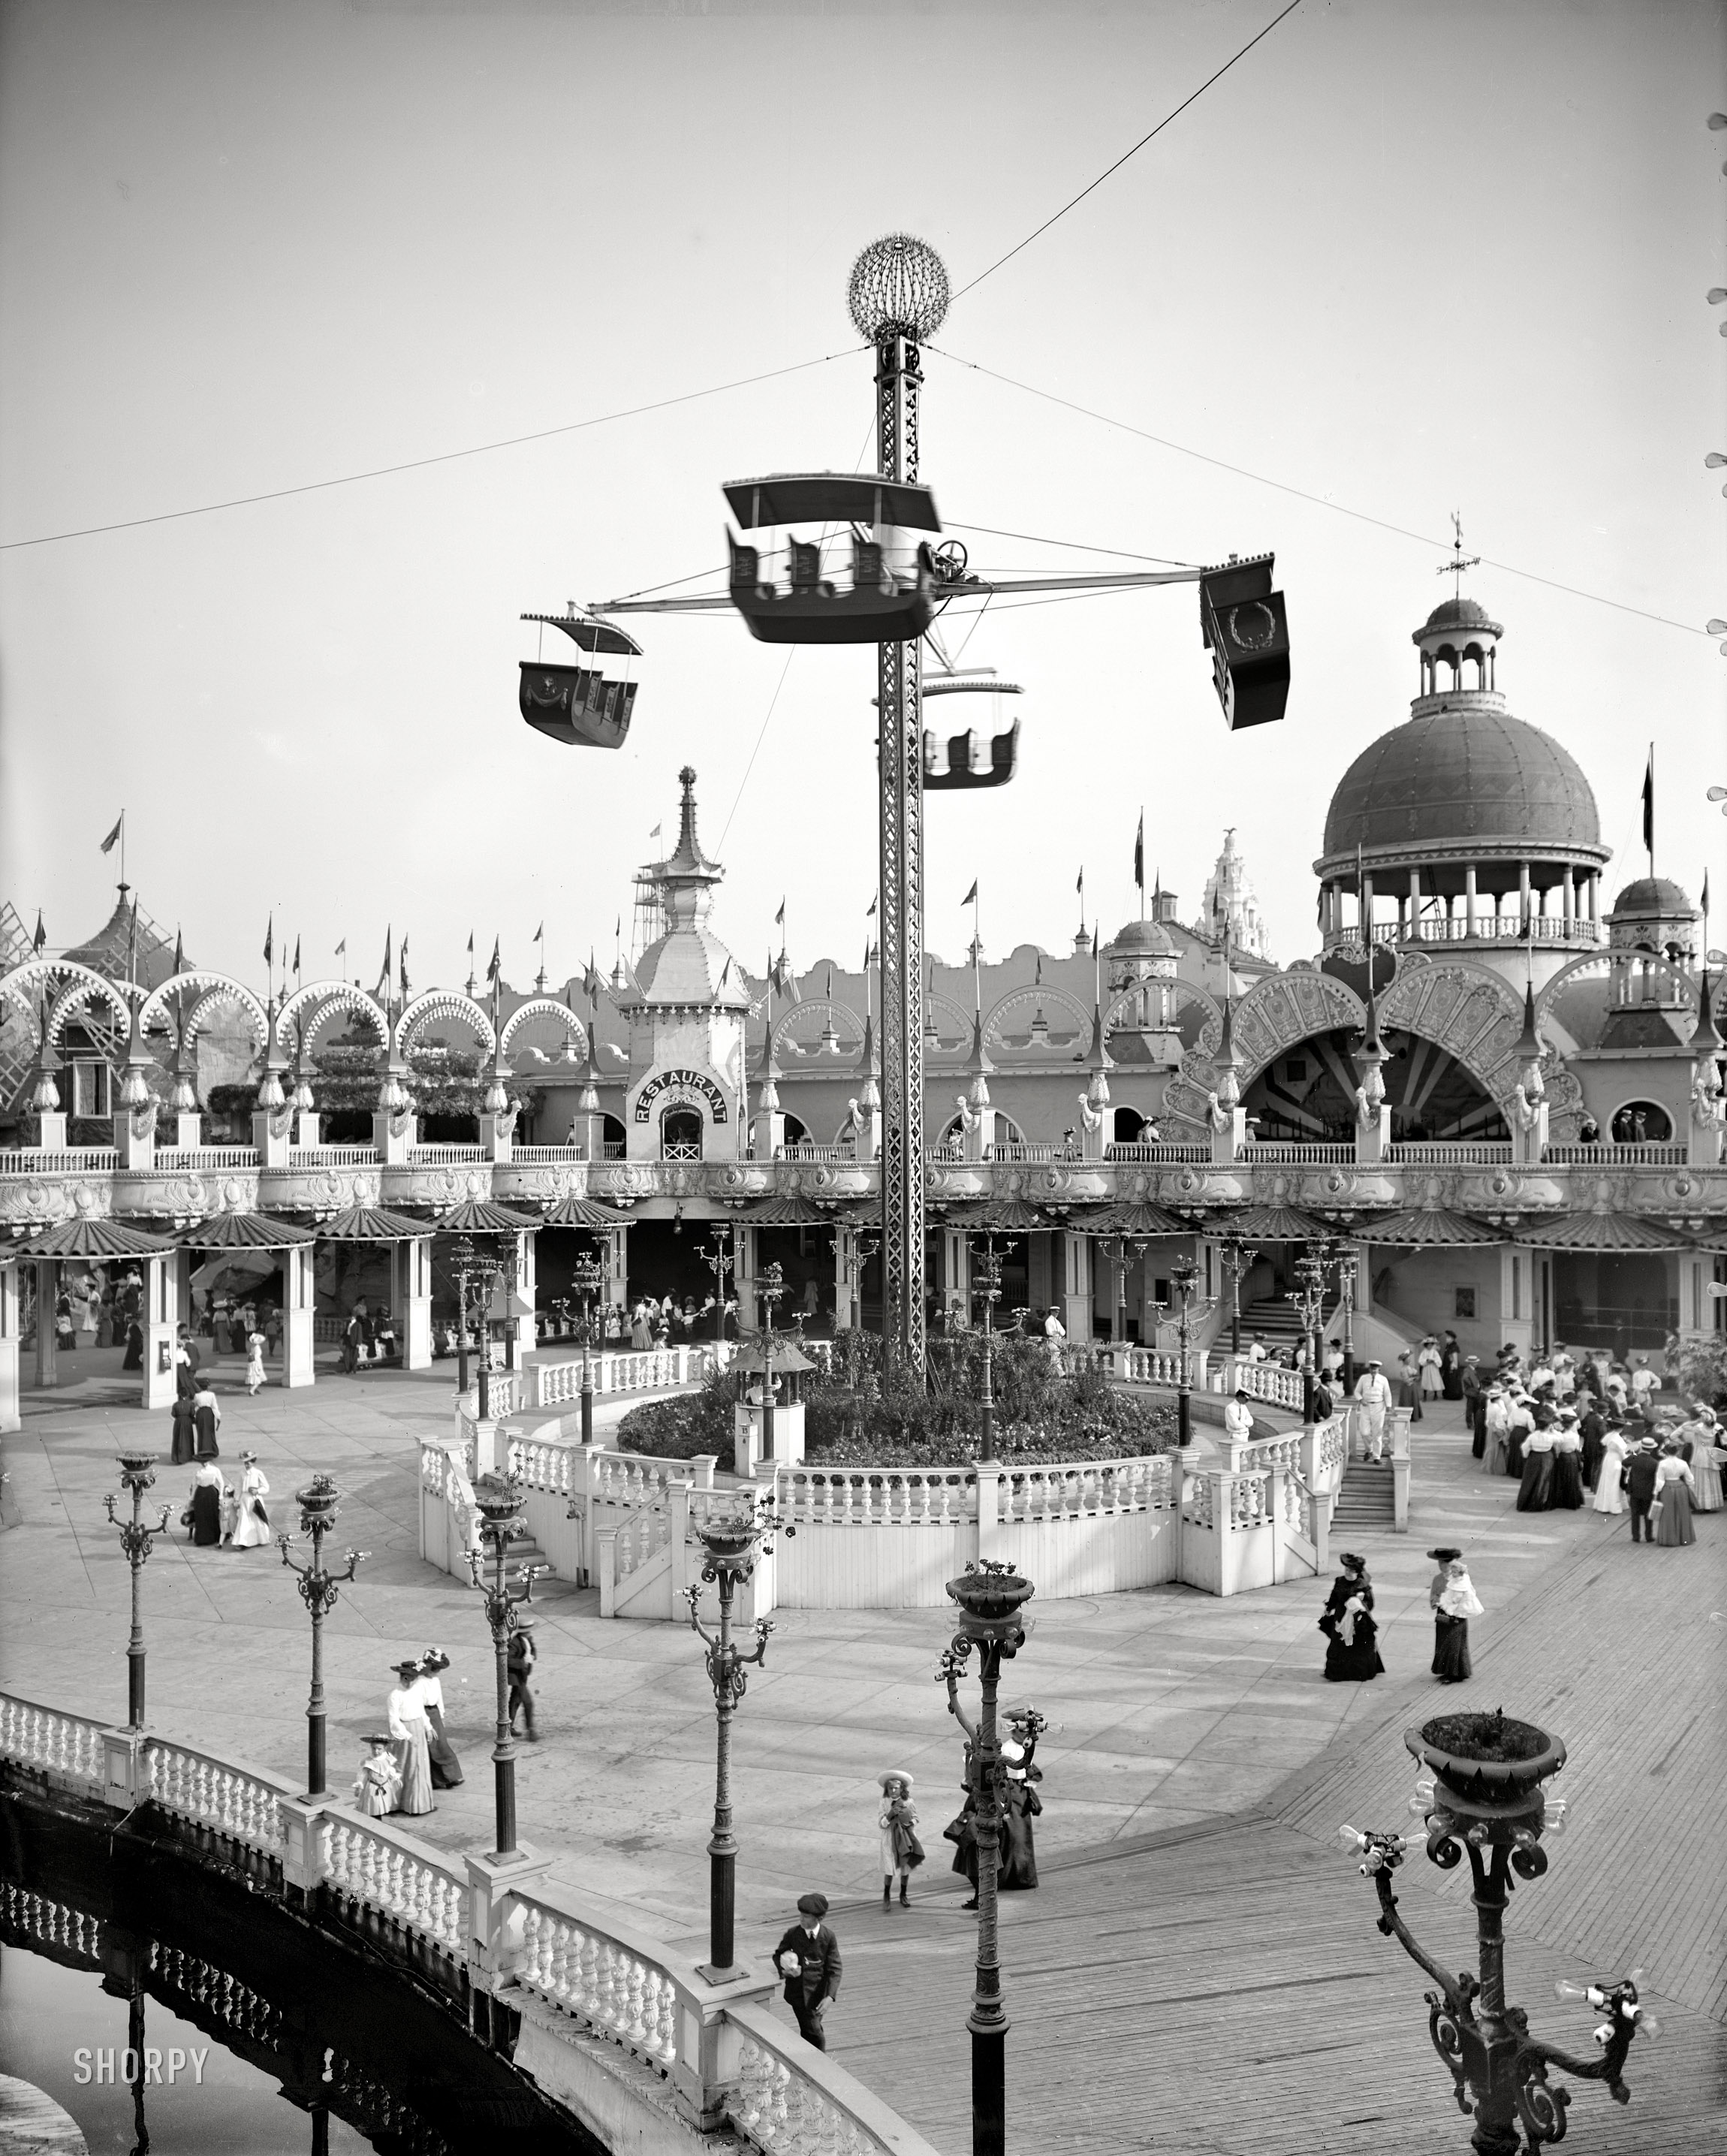 Coney Island, New York, circa 1905. "Whirl of the Wind, Luna Park." 8x10 inch dry plate glass negative, Detroit Publishing Company. View full size.